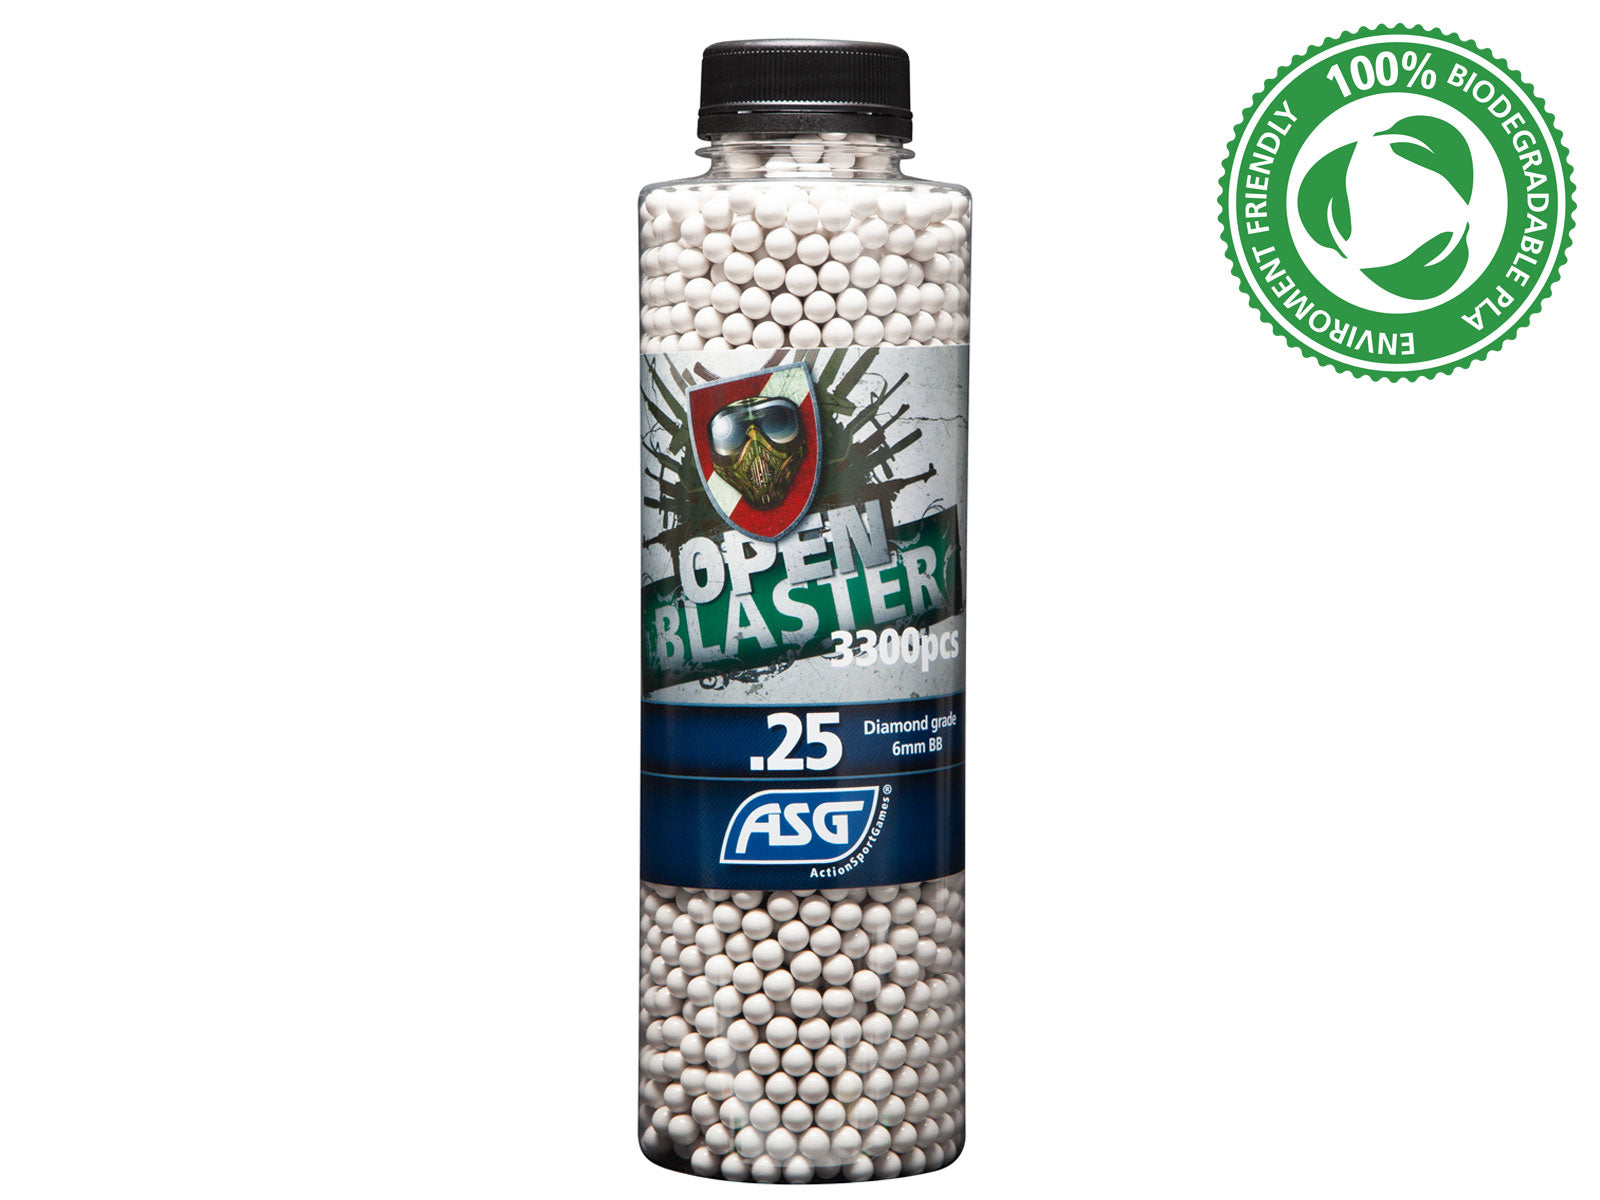 ASG Open Blaster .25 Biodegradable 6mm BBs – 3300 ct